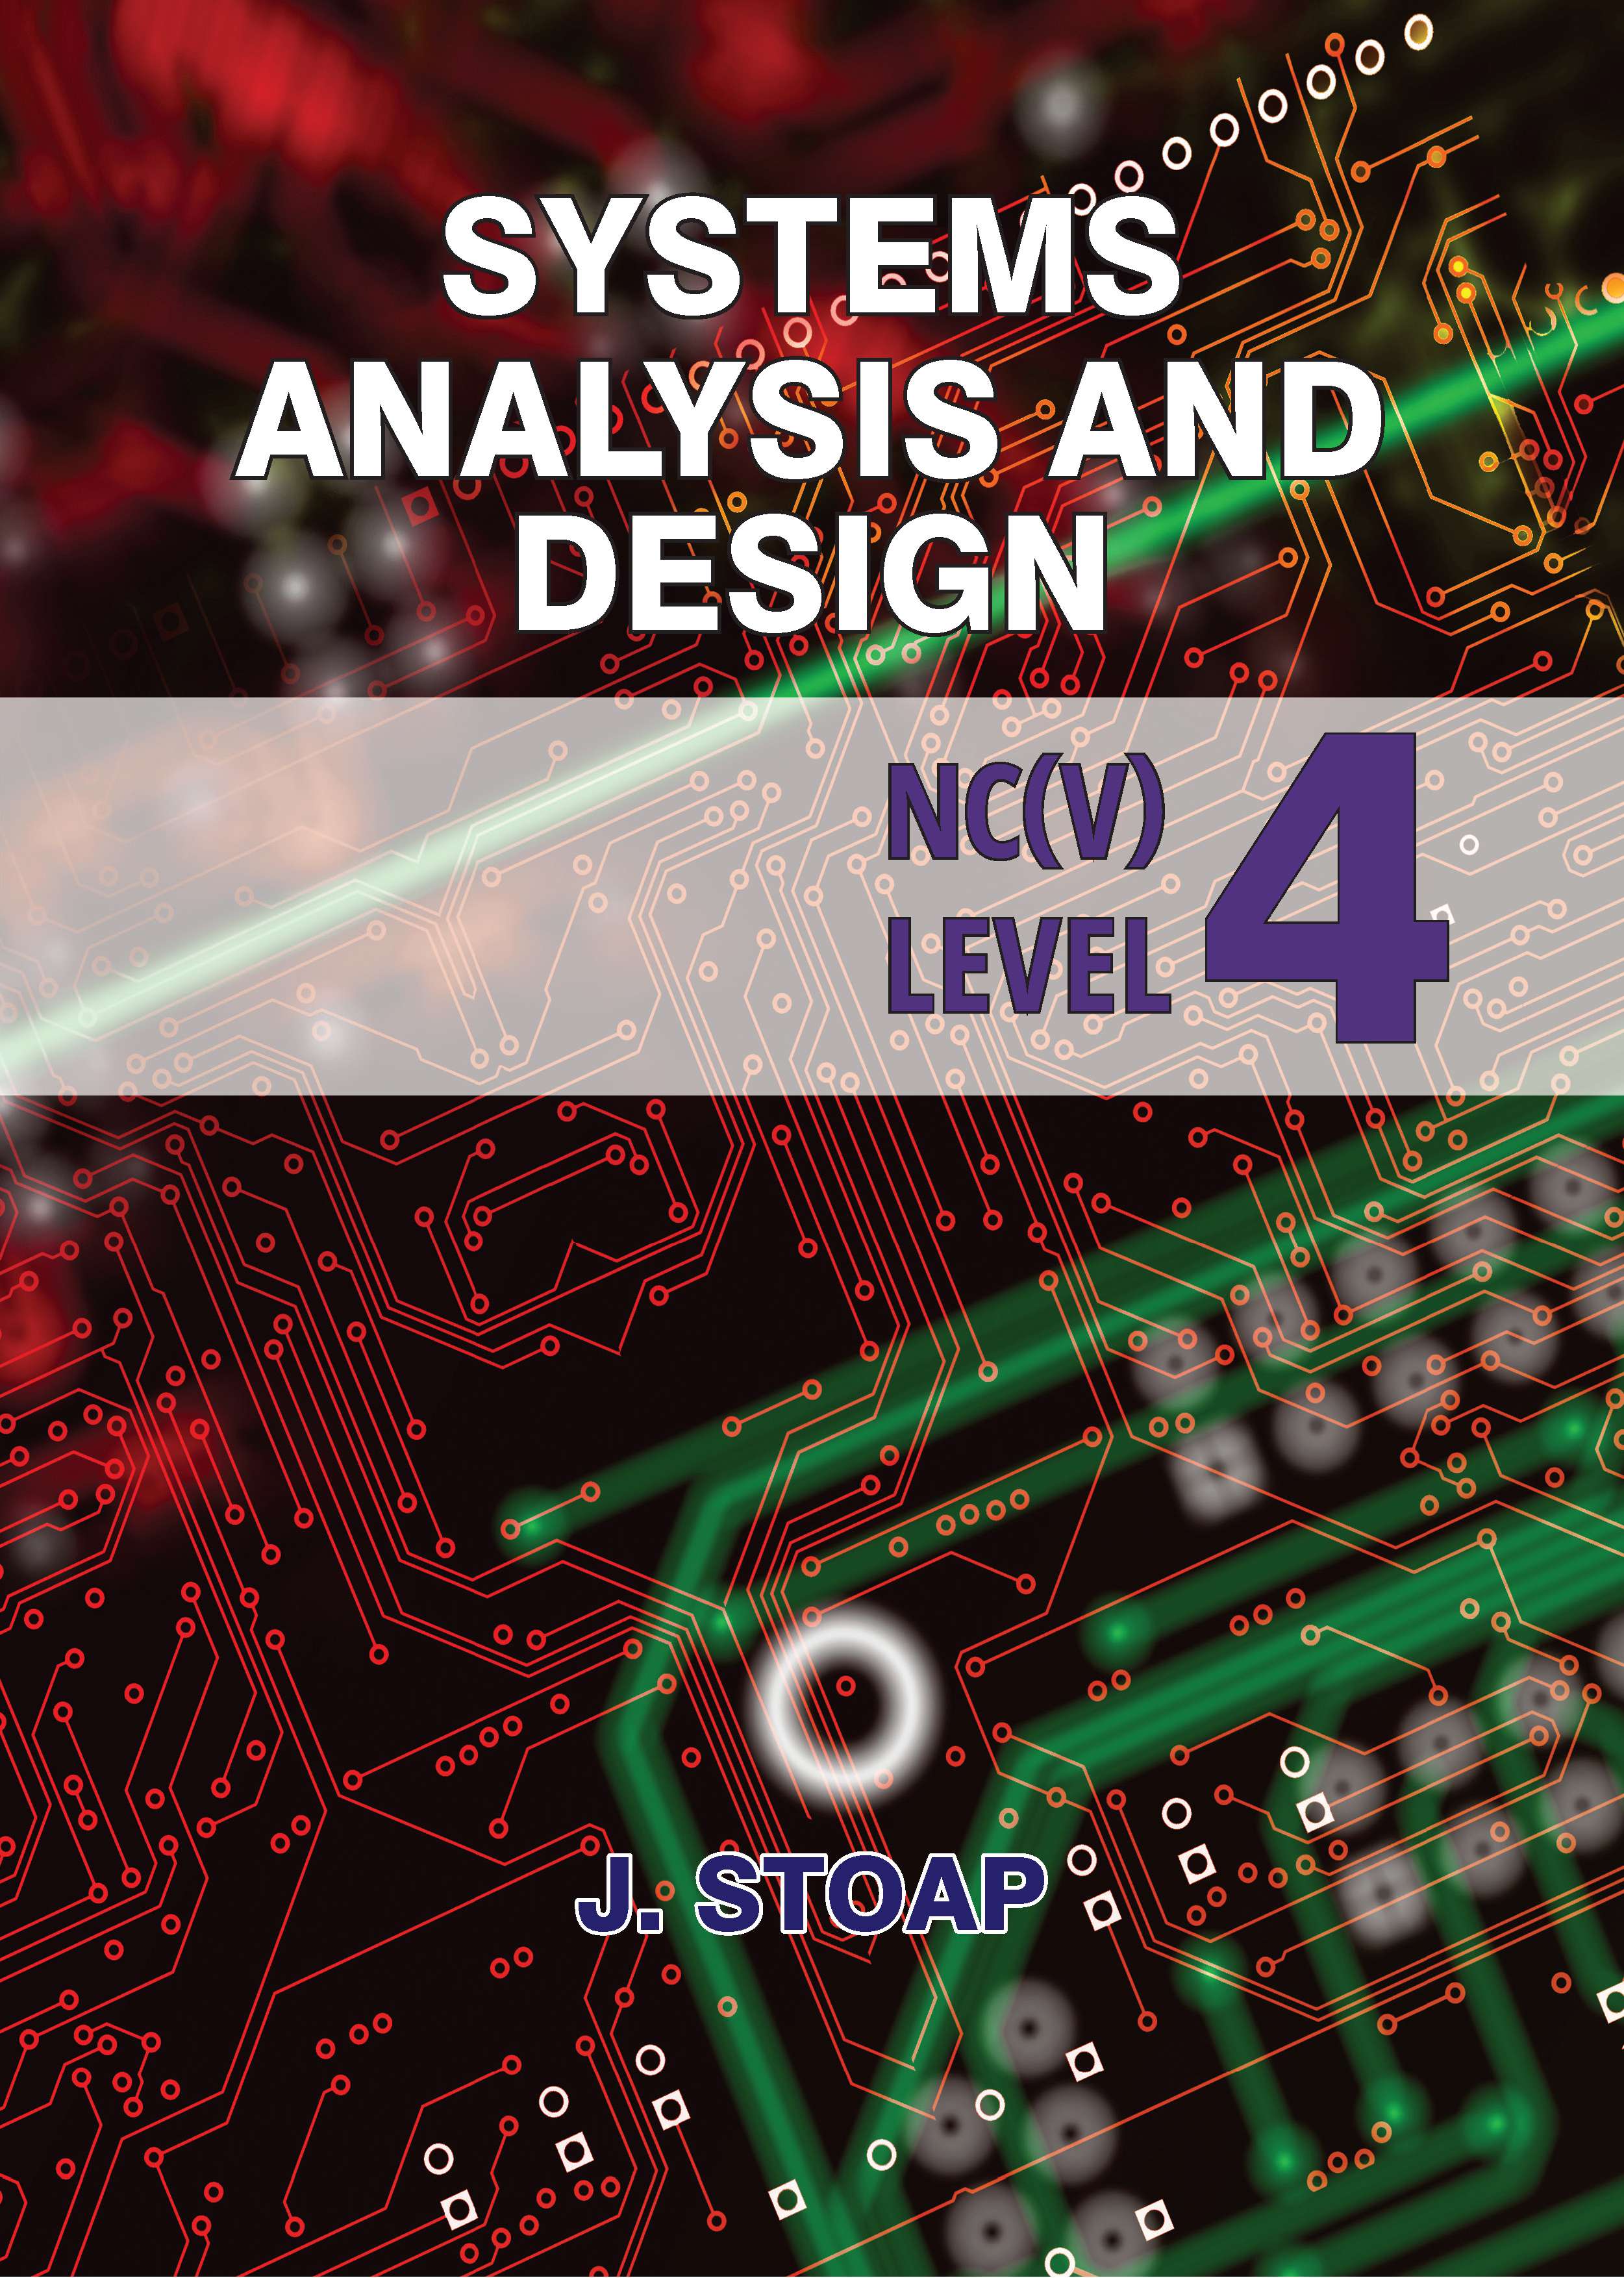 SHUTERS SYSTEMS ANALYSIS AND DESIGN NC(V) LEVEL 4 STUDENT TEXTBOOK Cover